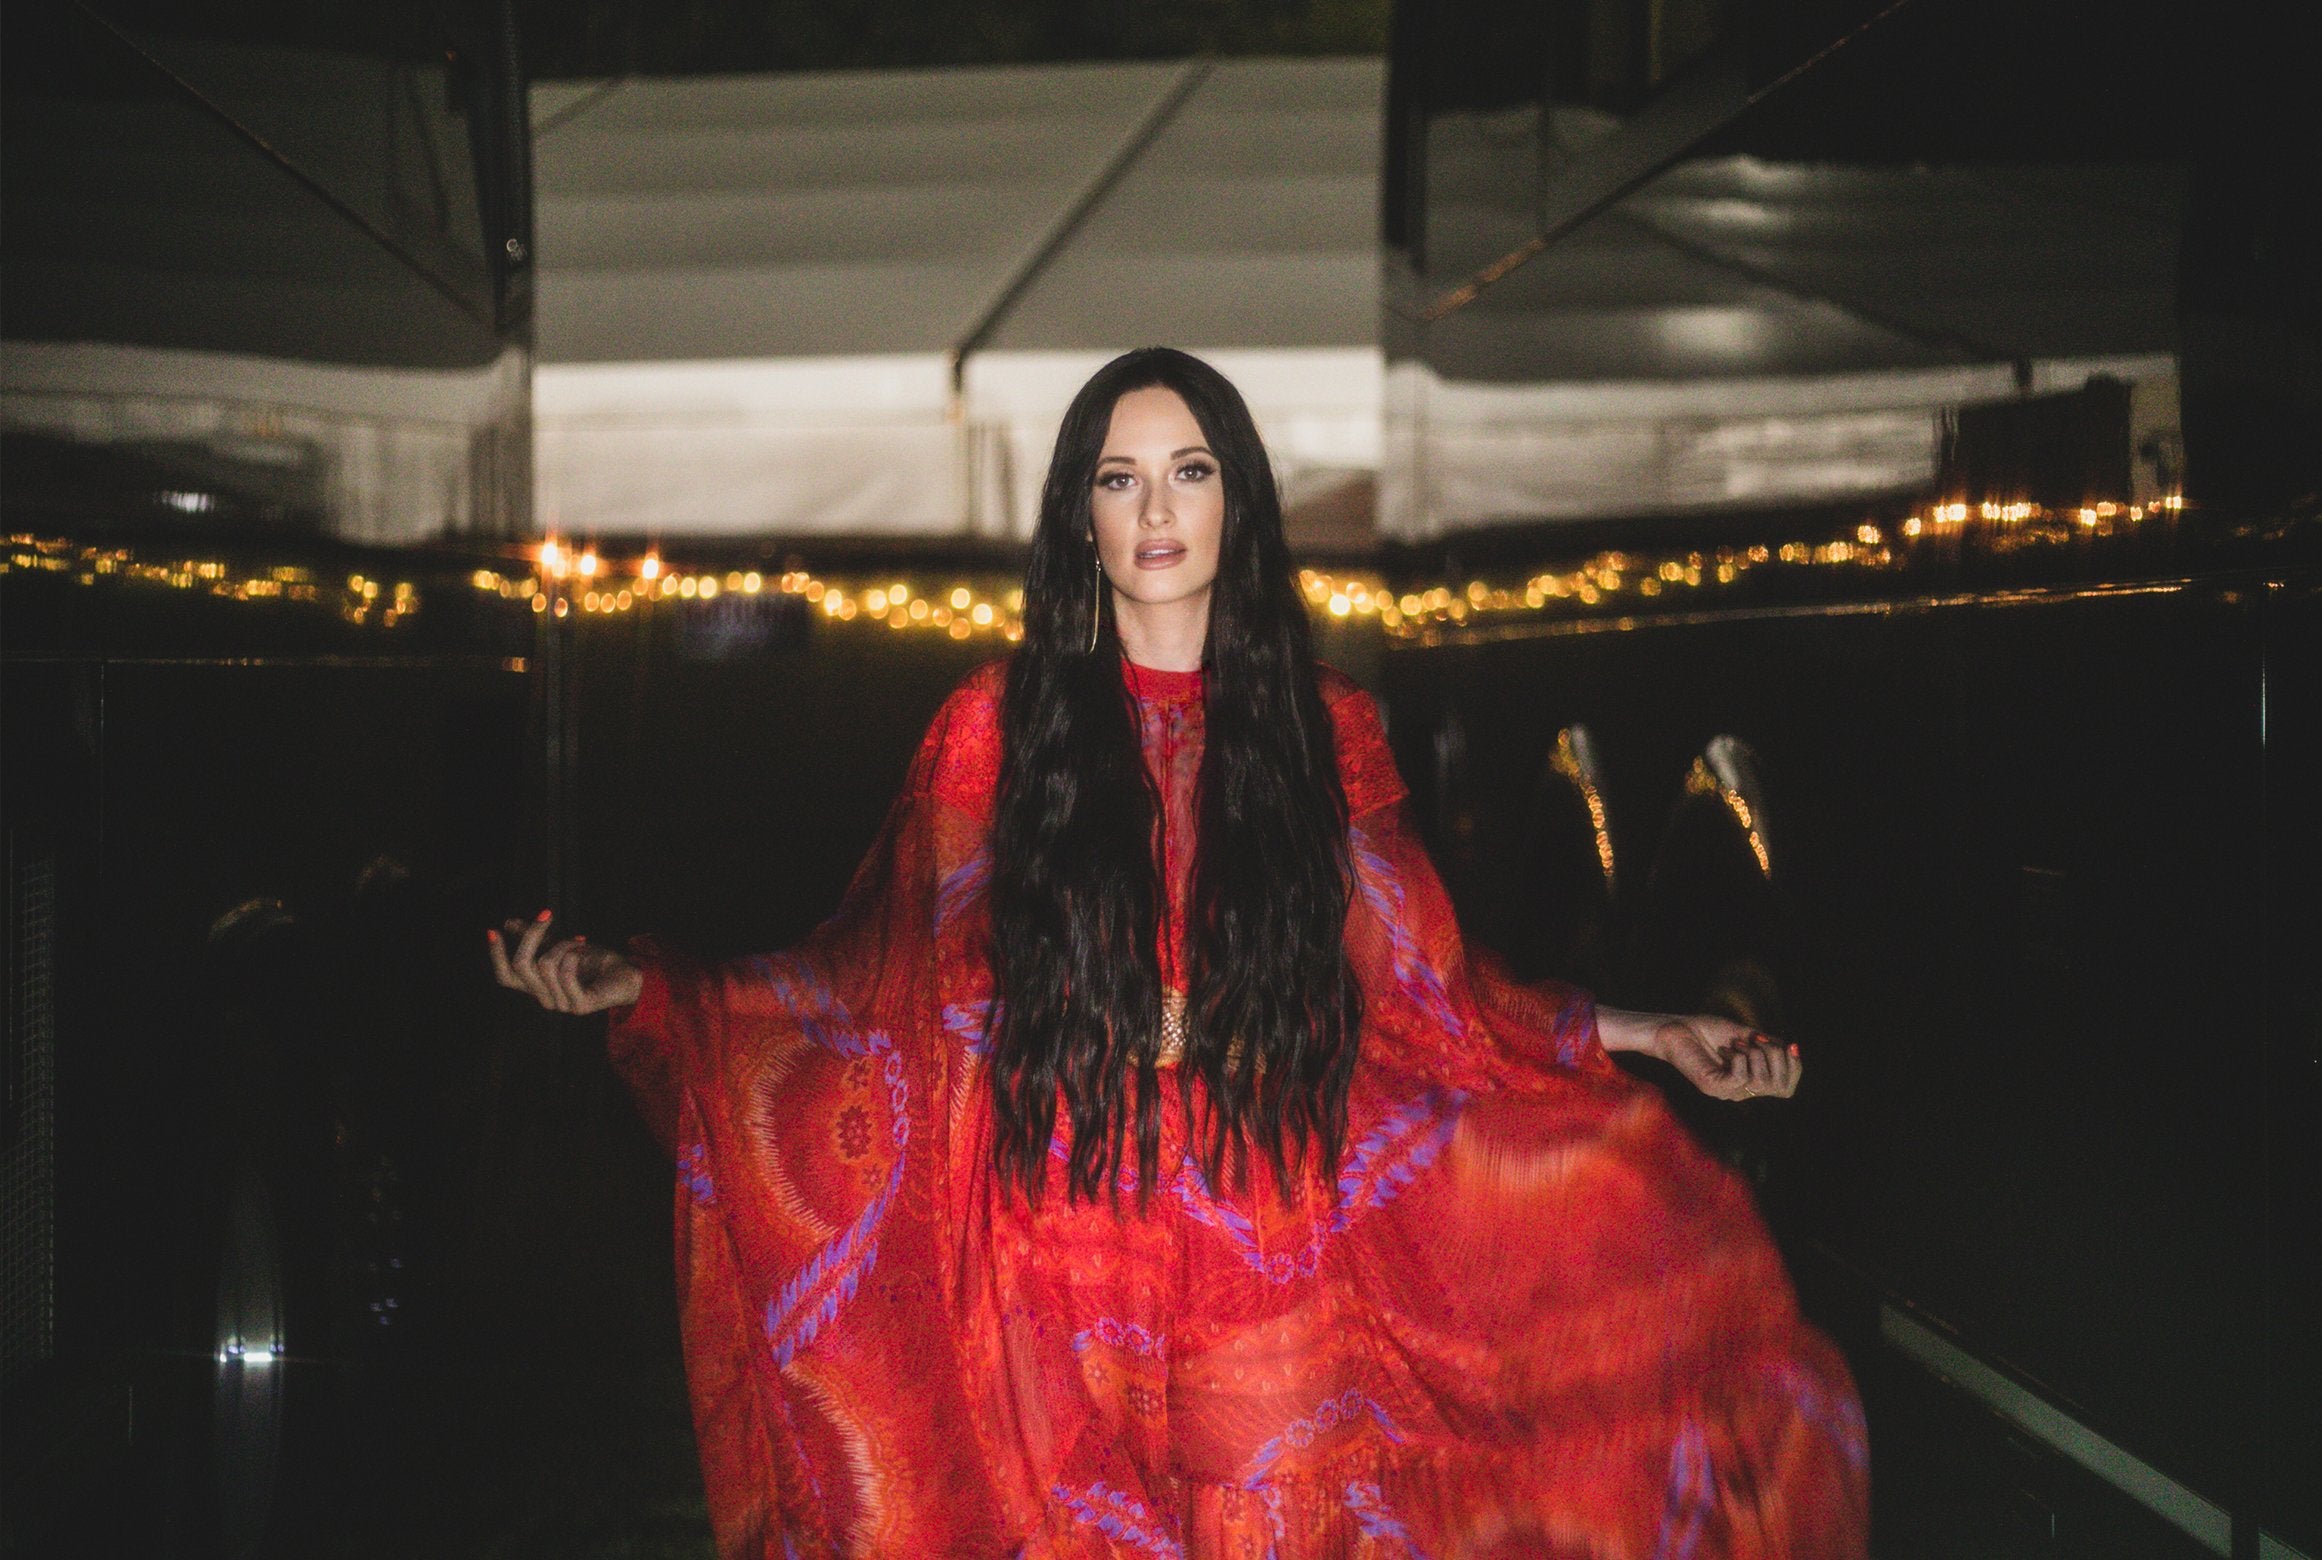 How-to get Kacey Musgraves Cult Vibes Summer Hair